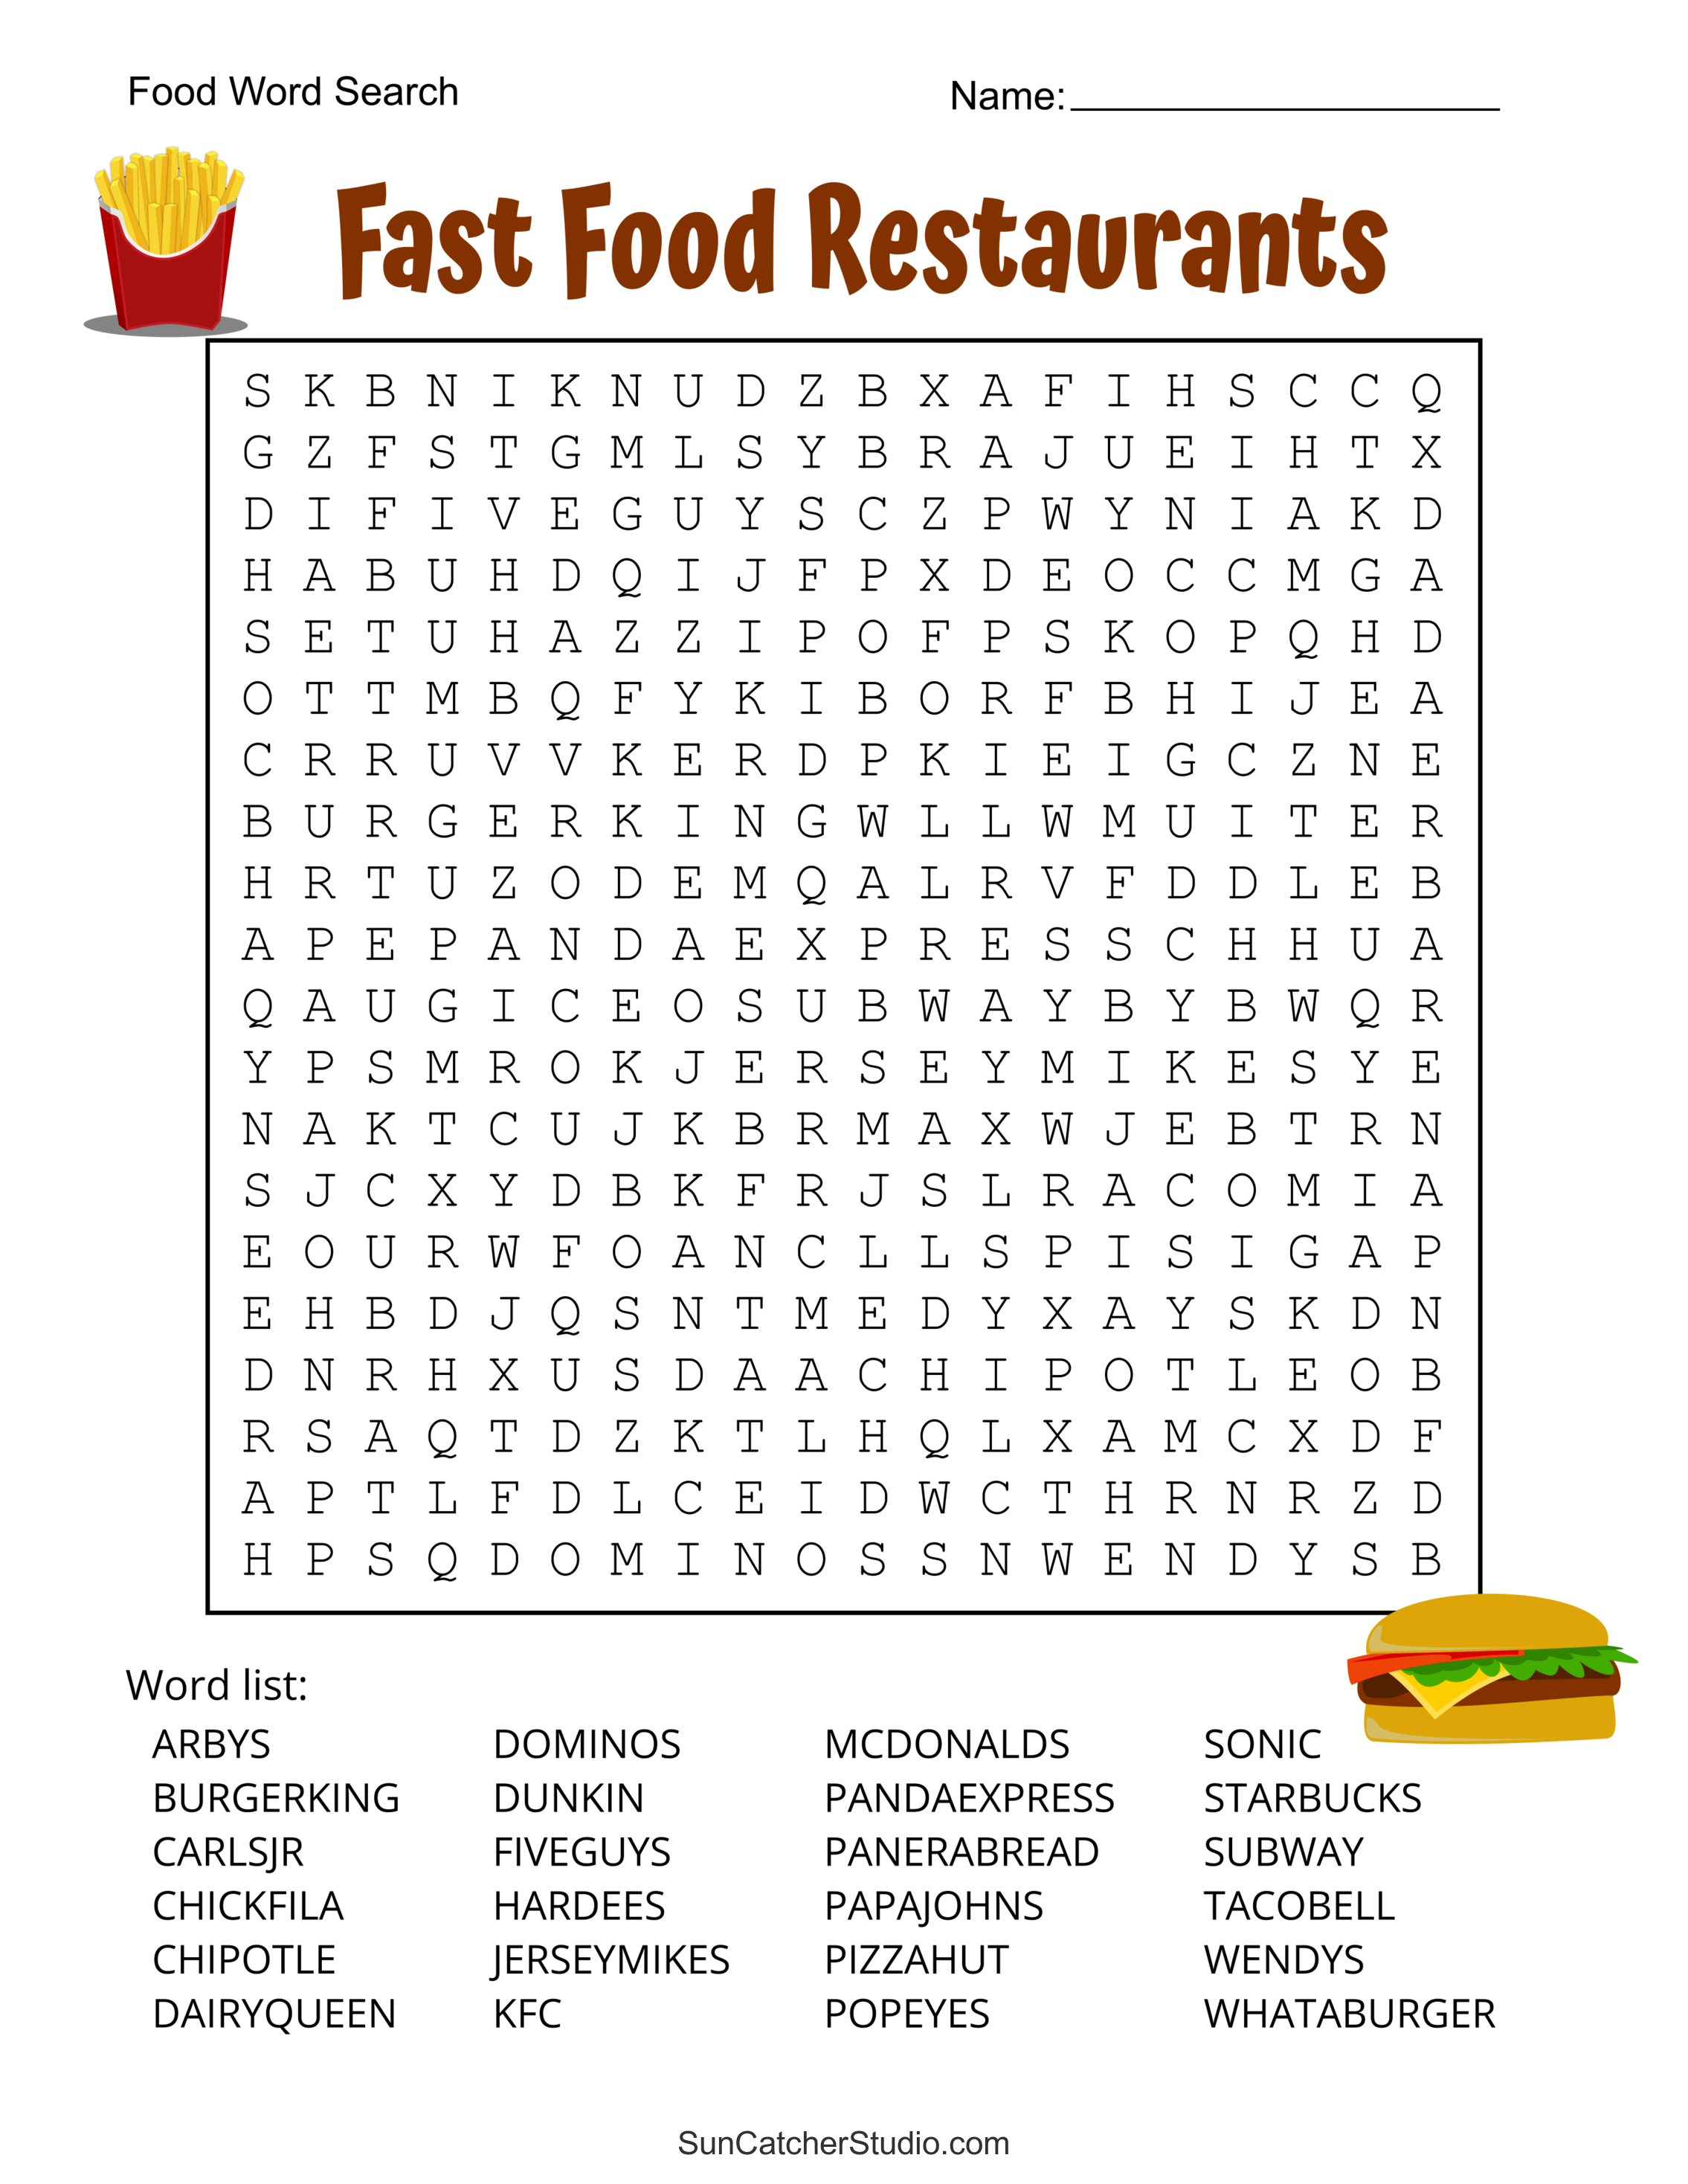 https://suncatcherstudio.com/uploads/printables/word-search/food-word-search/pdf-png/fast-food-restaurants-word-search-11.png